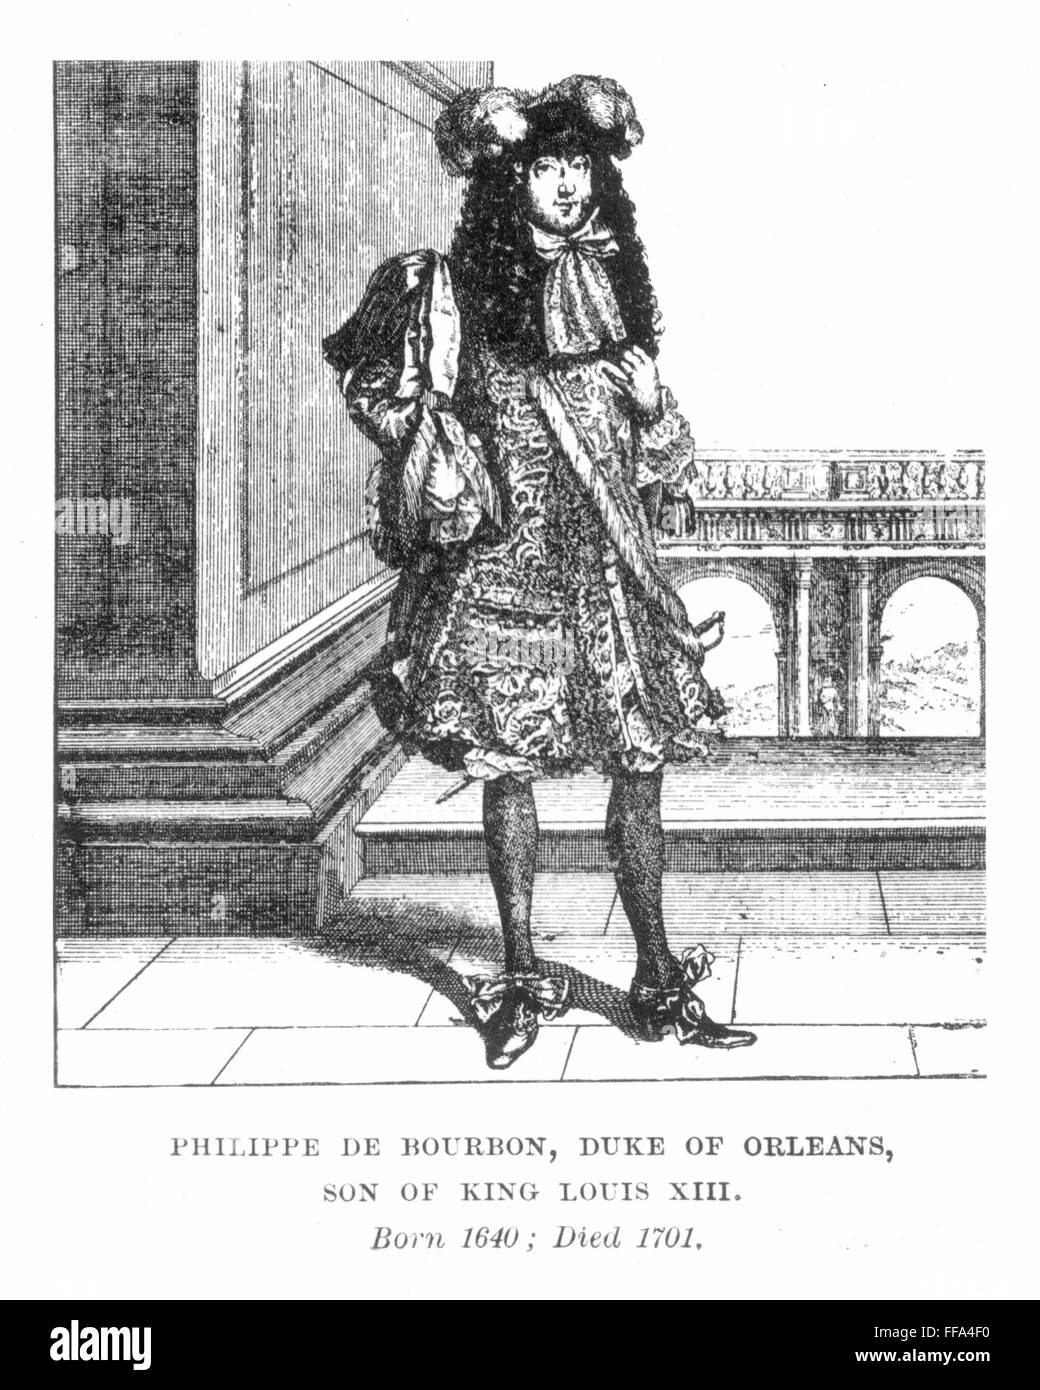 DUKE OF ORLEANS (1640-1701). /nPhilippe de Bourbon, duc d'Orleans. Son of King Louis XIII of France. Contemporary French line engraving. Stock Photo